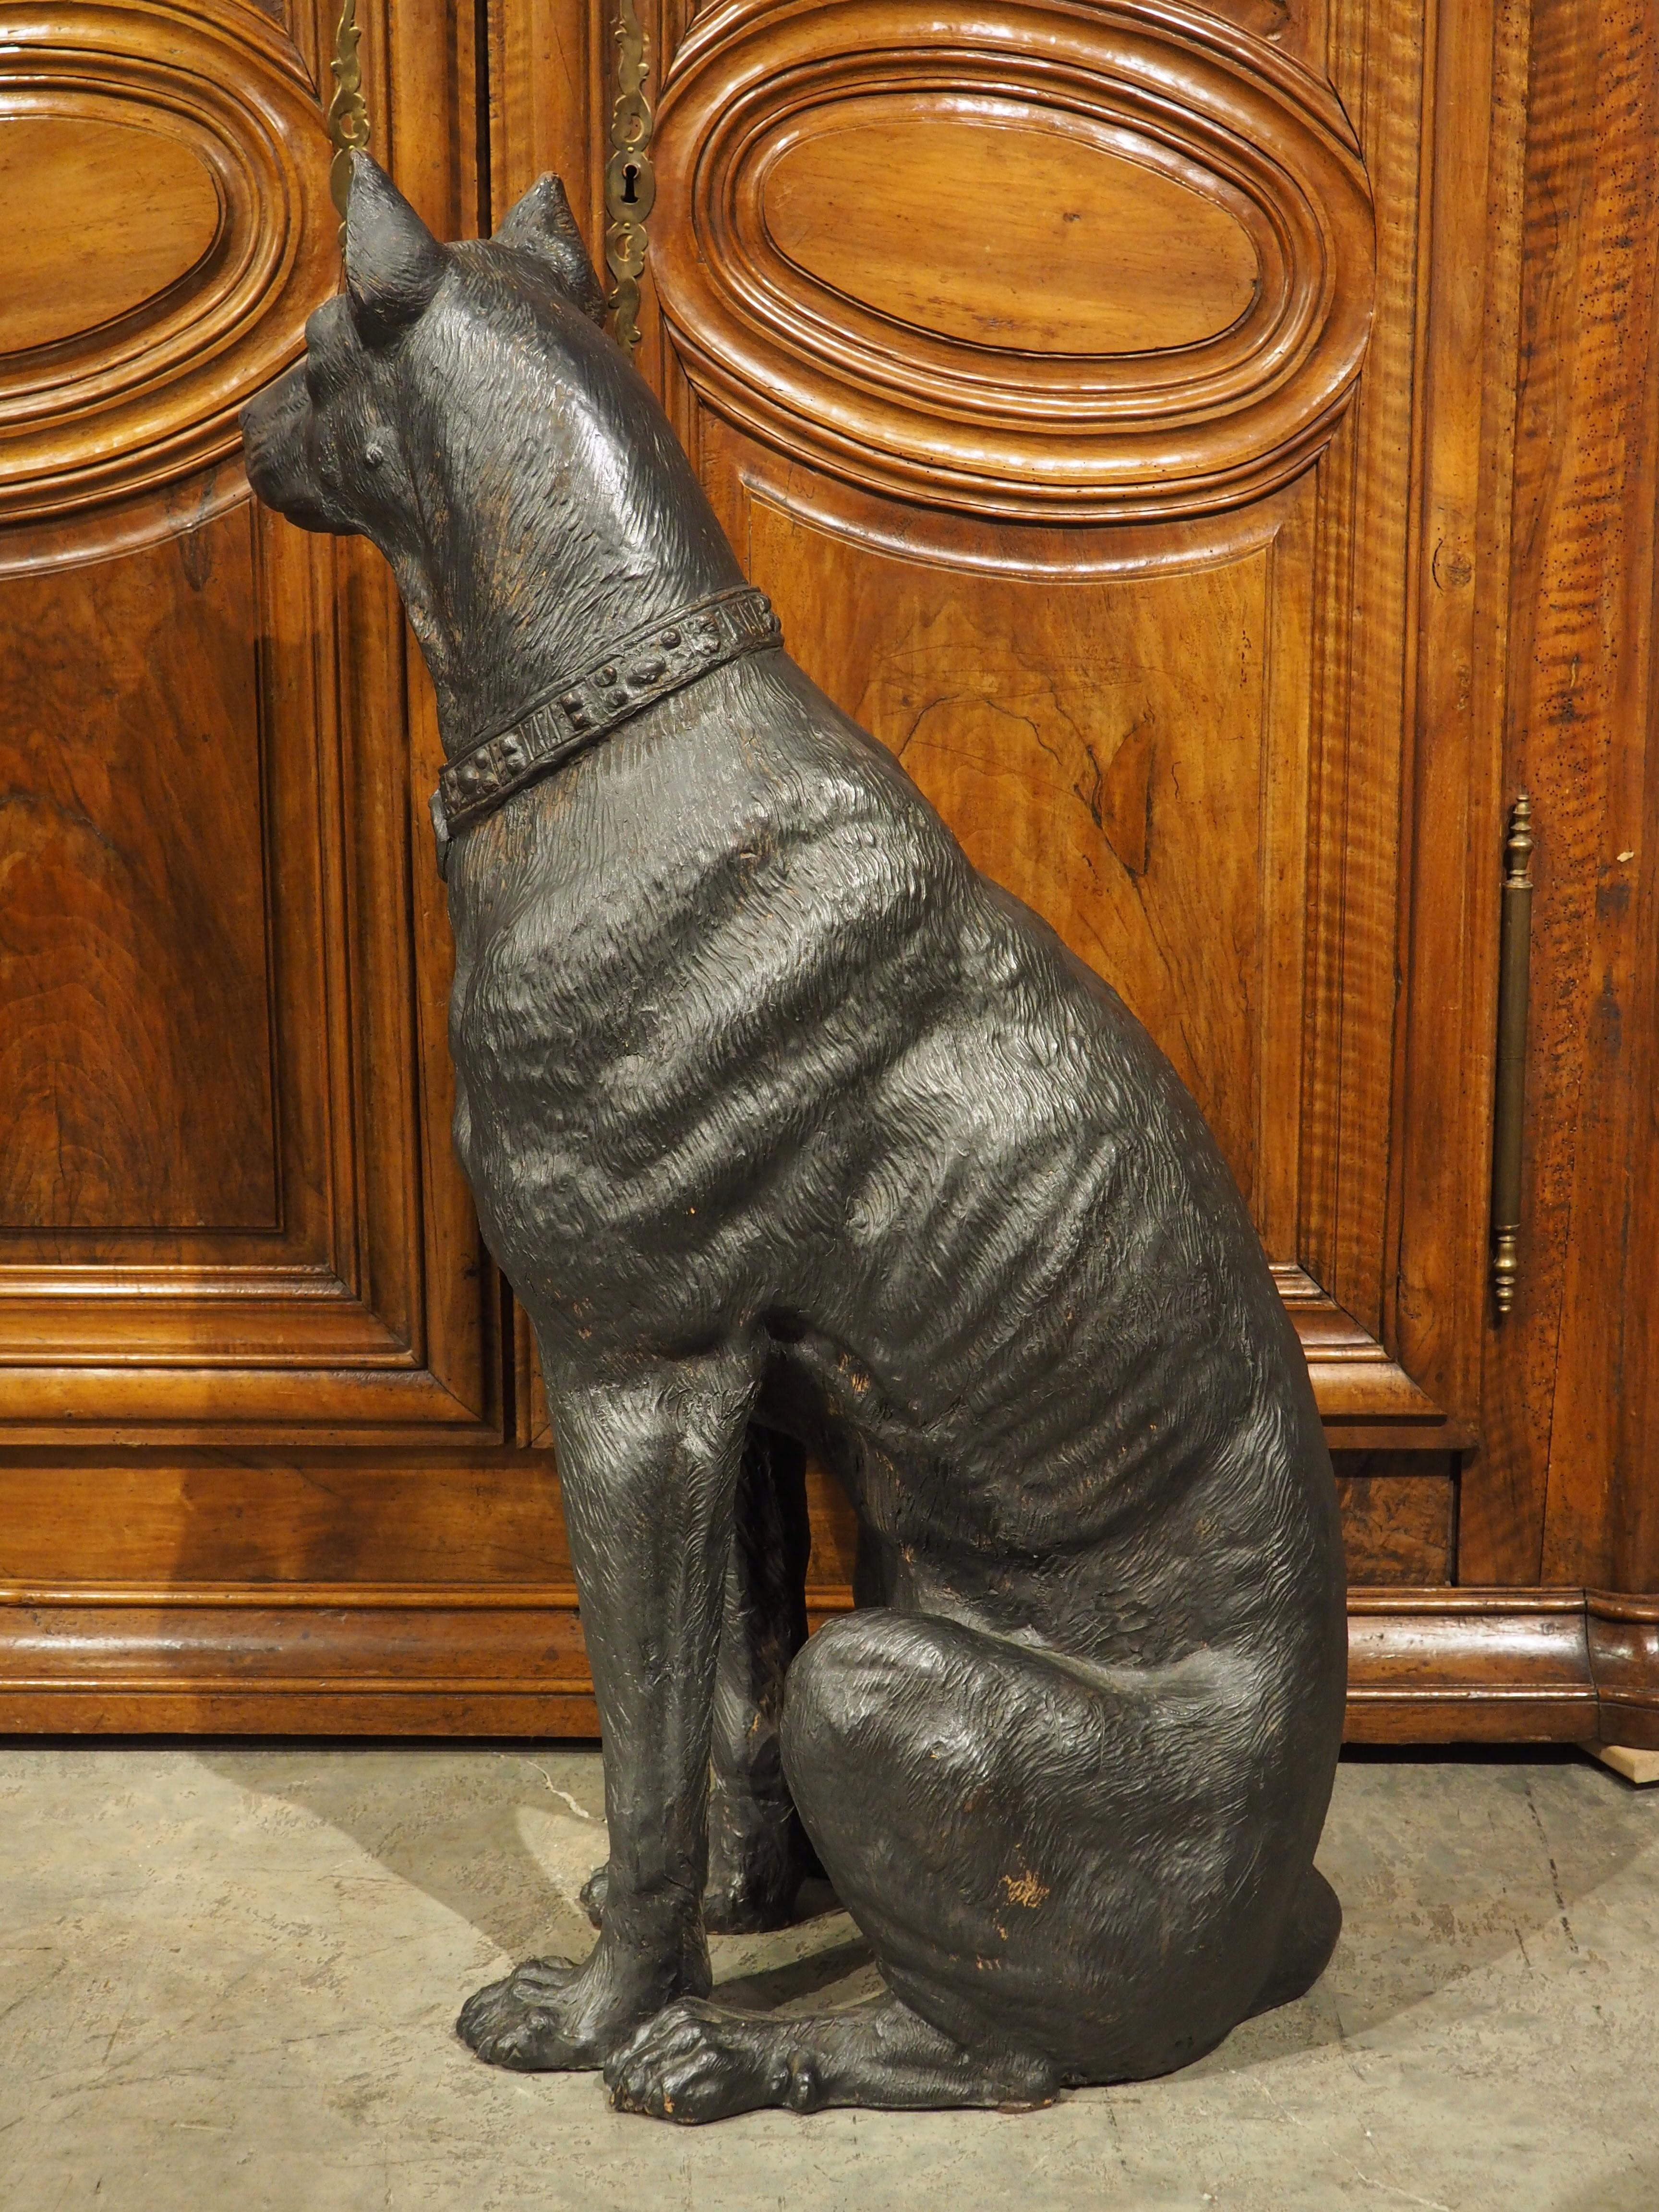 Originally from Austria, circa 1880, this life-sized painted terra cotta sculpture depicts a large and regal pinscher. The seated dog has been hand-painted black, with light traces of the original orange terra cotta color showing. A bejeweled collar